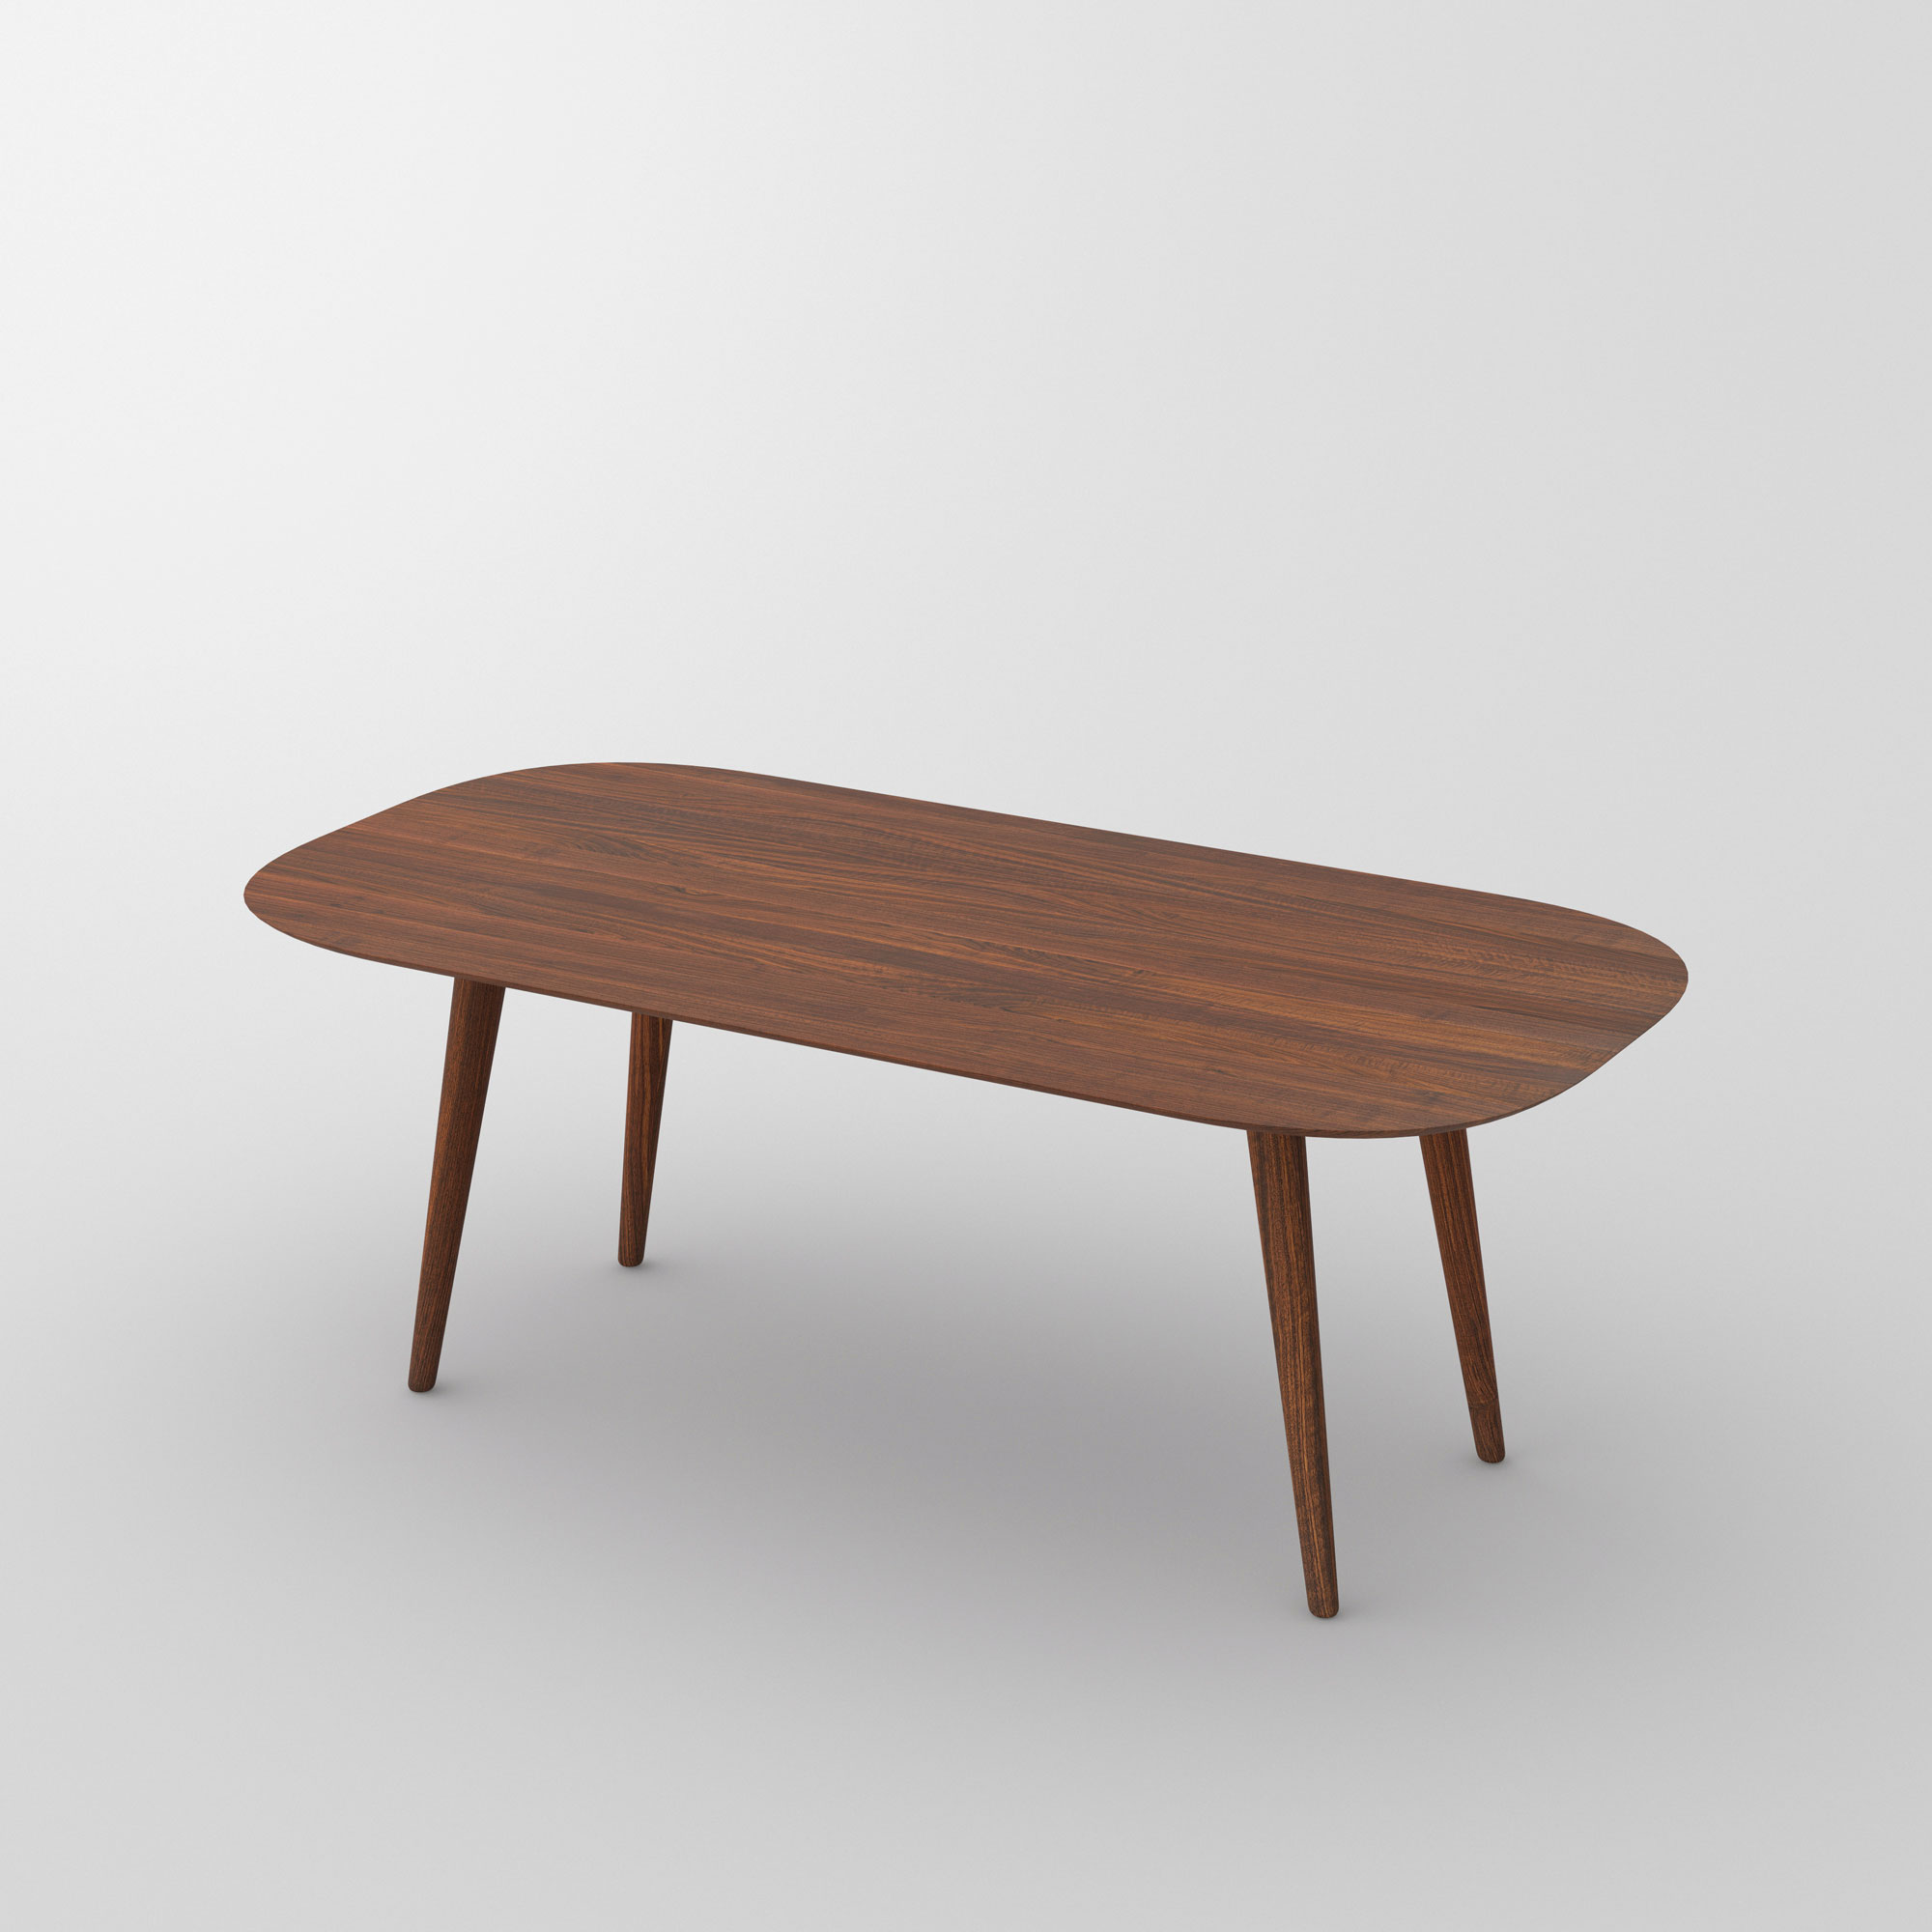 Oval Dining Table AMBIO vitamin-design custom made in solid wood by vitamin design